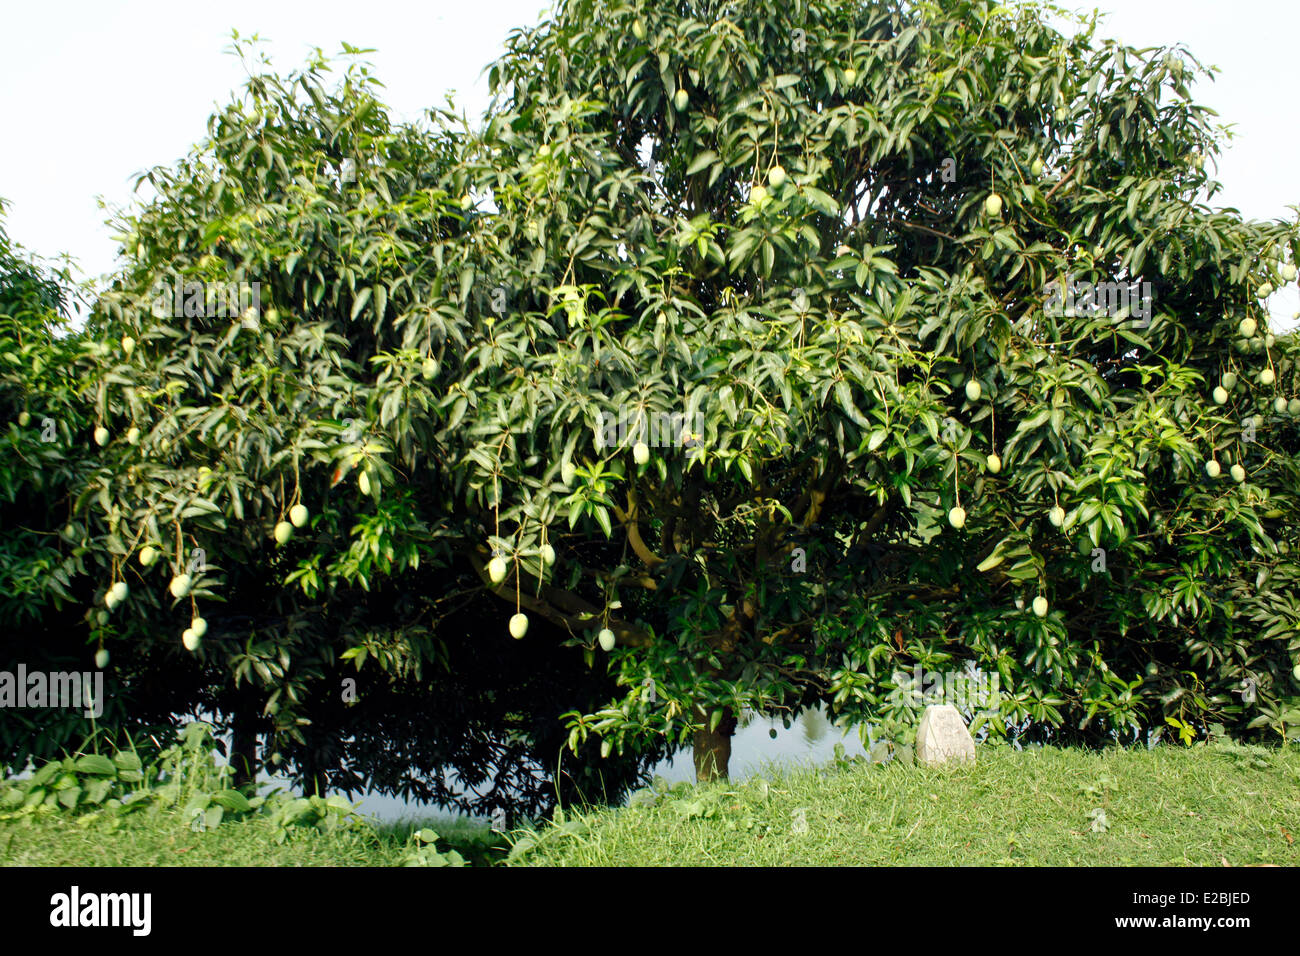 Mango garden Bangladesh generally produces about 800,000 metric tons of mangoes on 51,000 hectors of land. Chapainawabganj alone produces almost 200,000 tons of mangoes on 23,282 hectares of land. Stock Photo